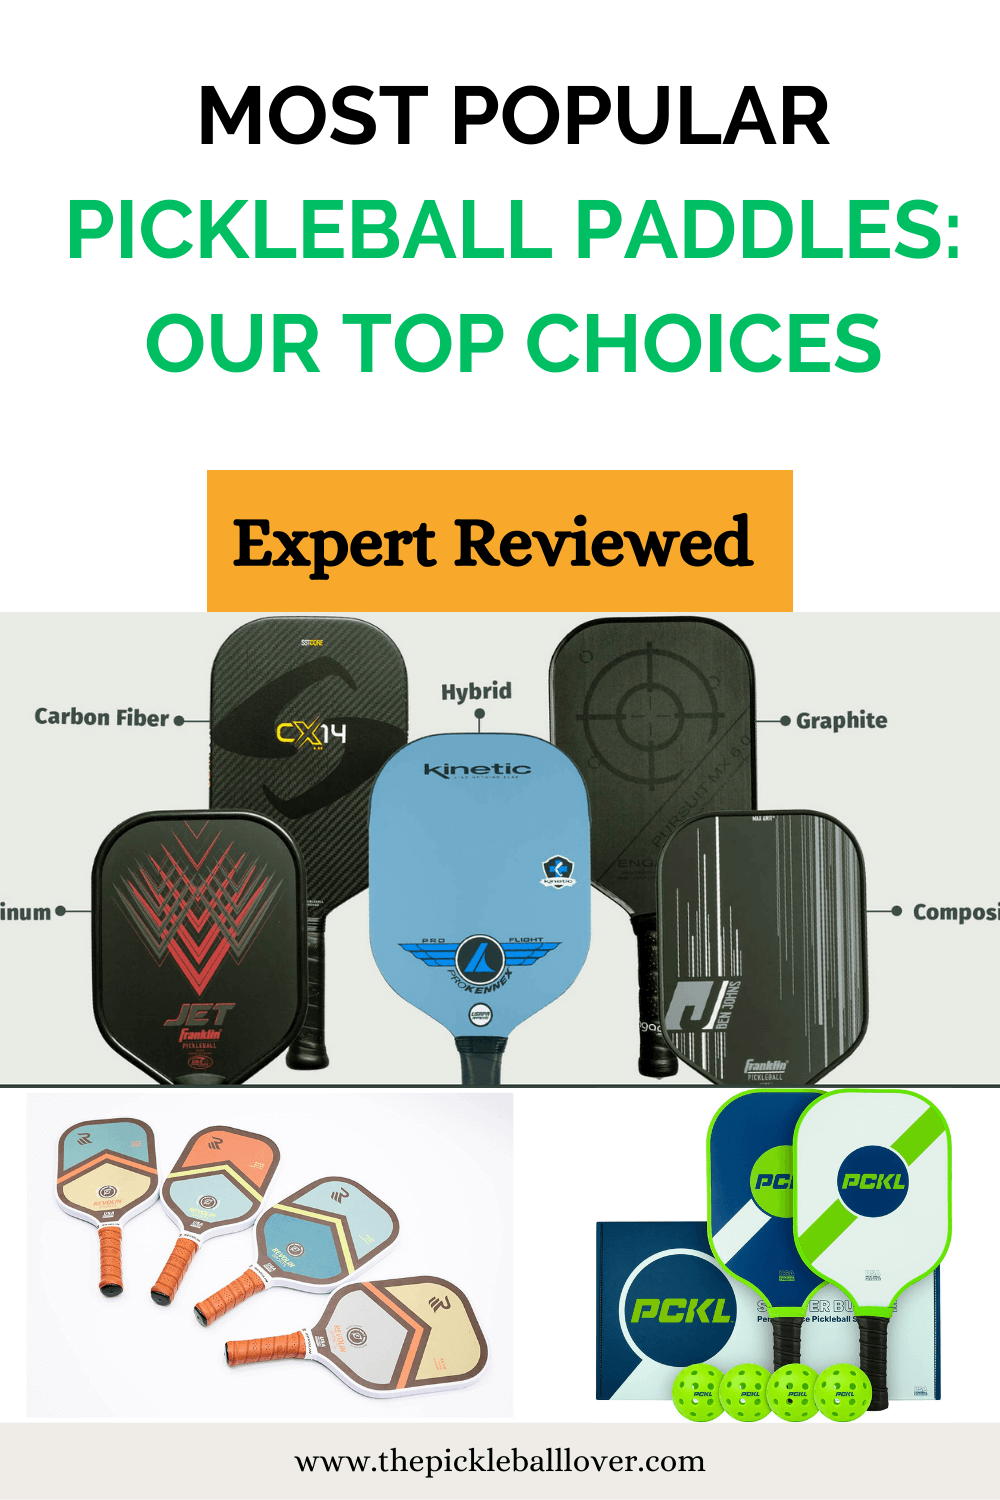 Most Popular Pickleball Paddles: Our Top Choices